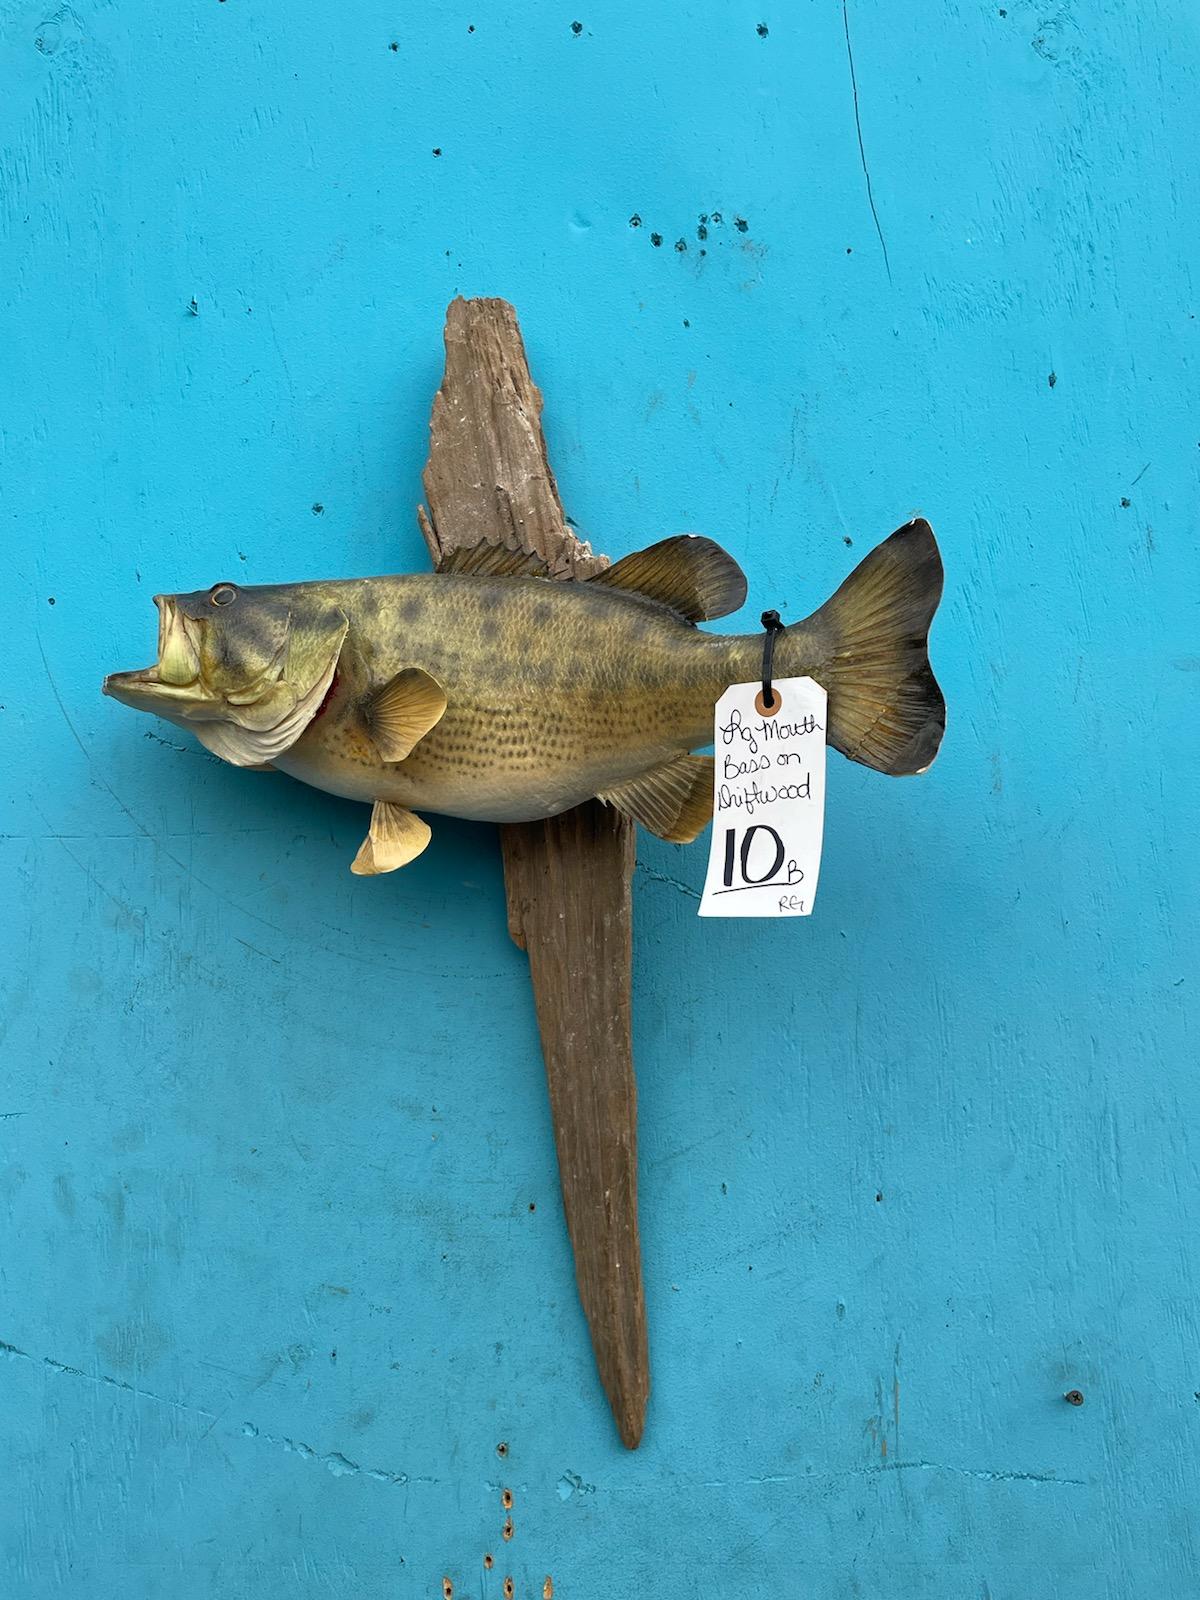 LG MOUTH BASS ON DRIFTWOOD  TAXIDERMY